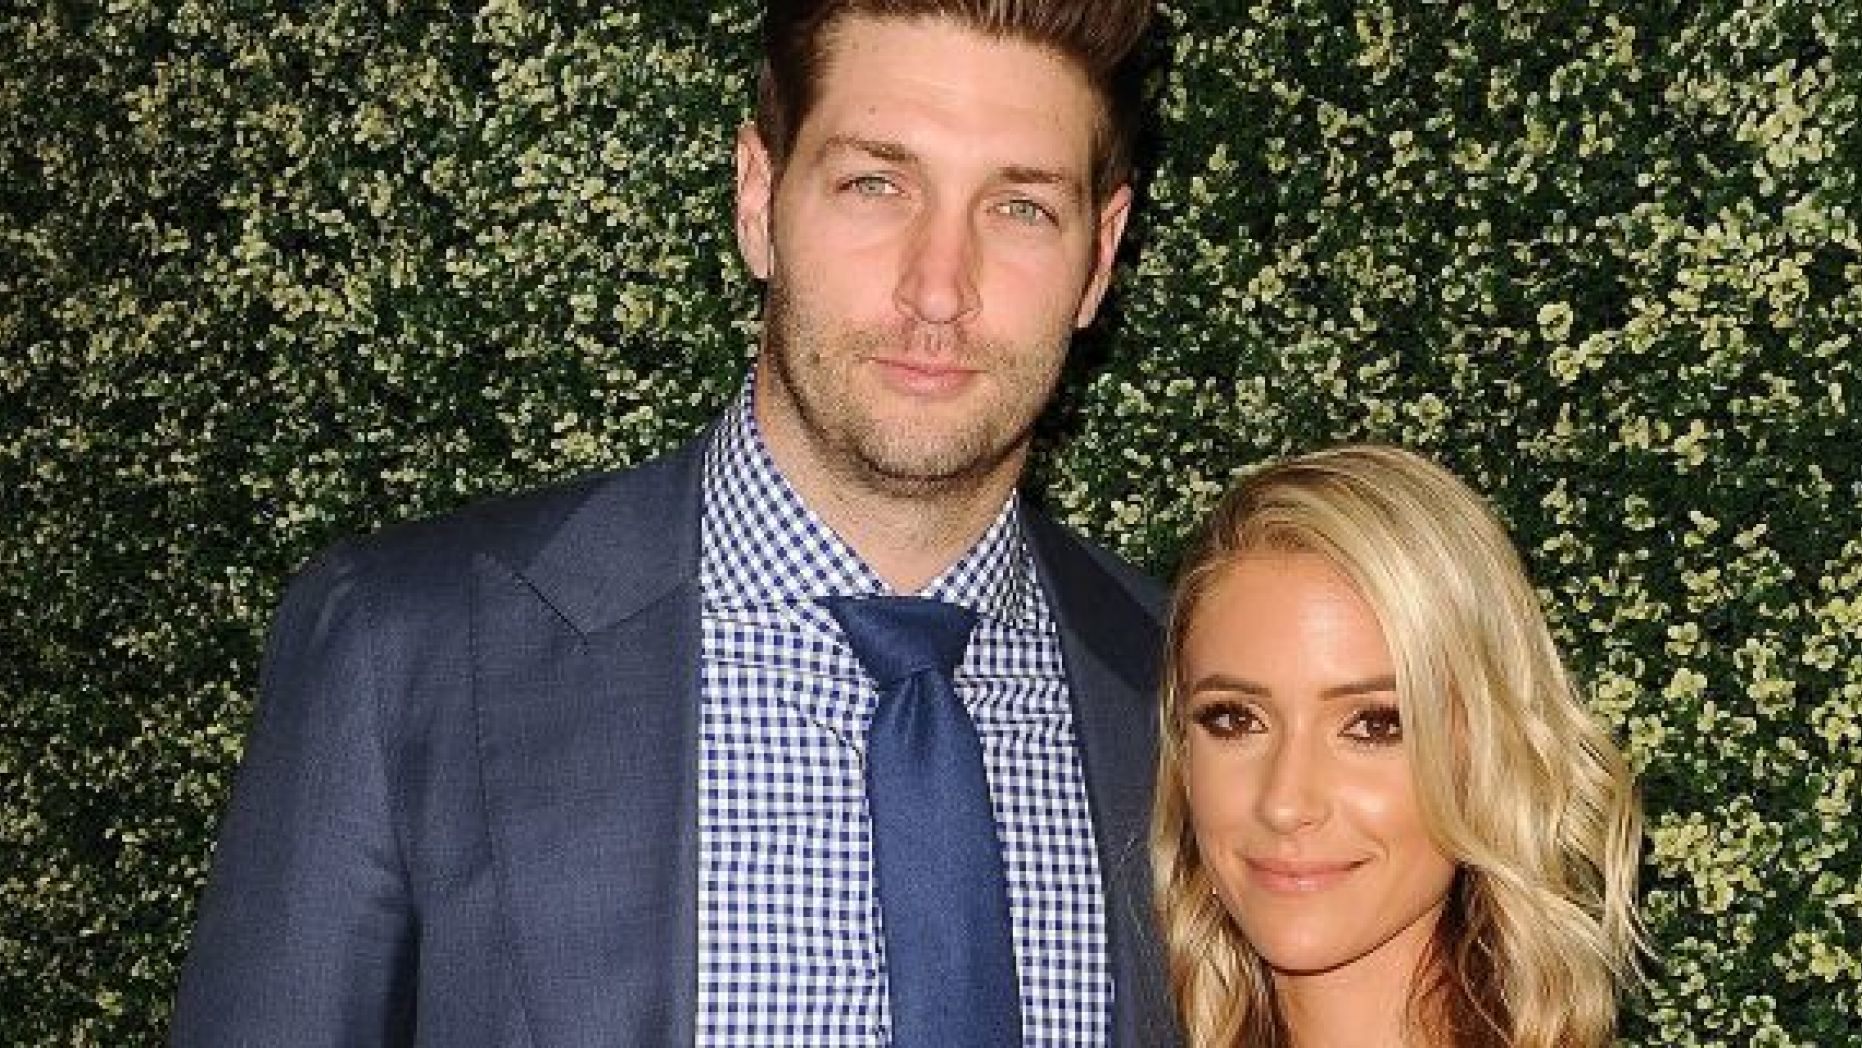 Jay Cutler and Kristin Cavallari are pictured here during the "Uncommon James" launch on April 27, 2017 in West Hollywood, Calif. Cavallari hit back at critics after she revealed Cutler helped her unclog her milk ducts in a preview clip of her show "Very Cavallari."